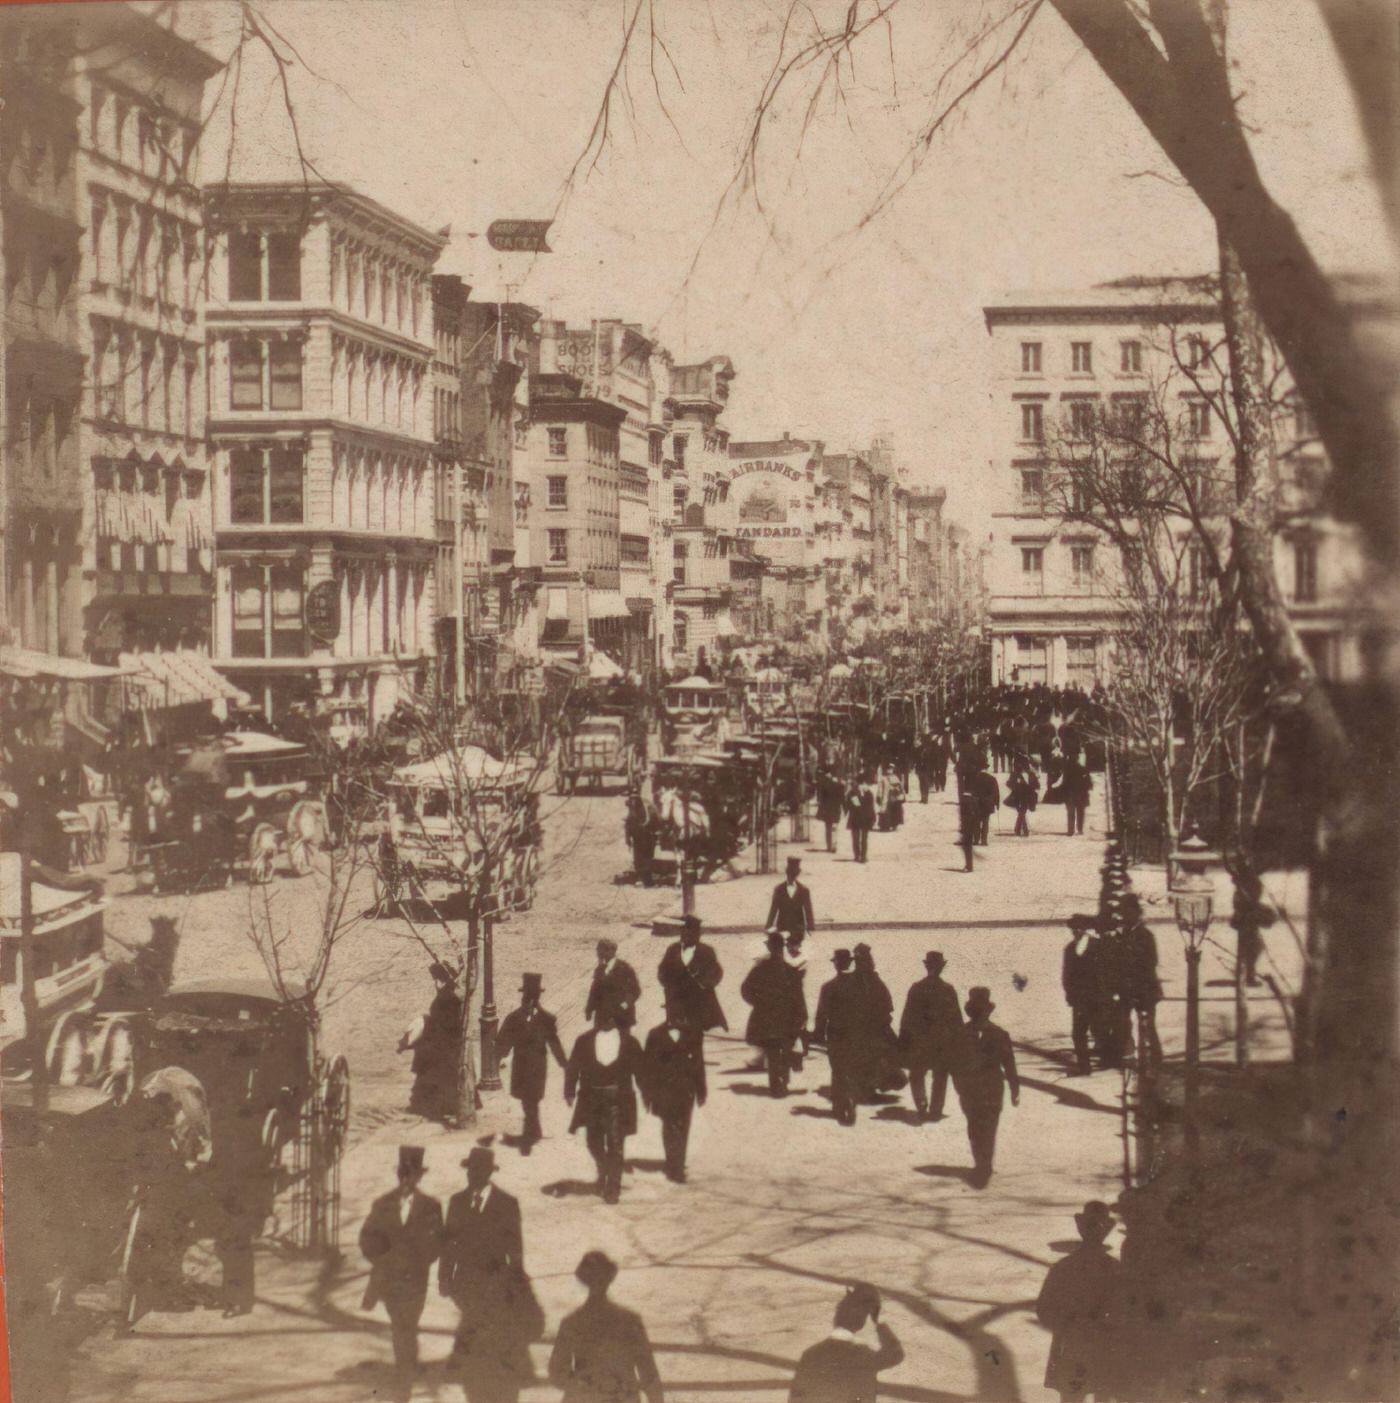 Broadway, Looking North From New Post Office, Manhattan, 1860